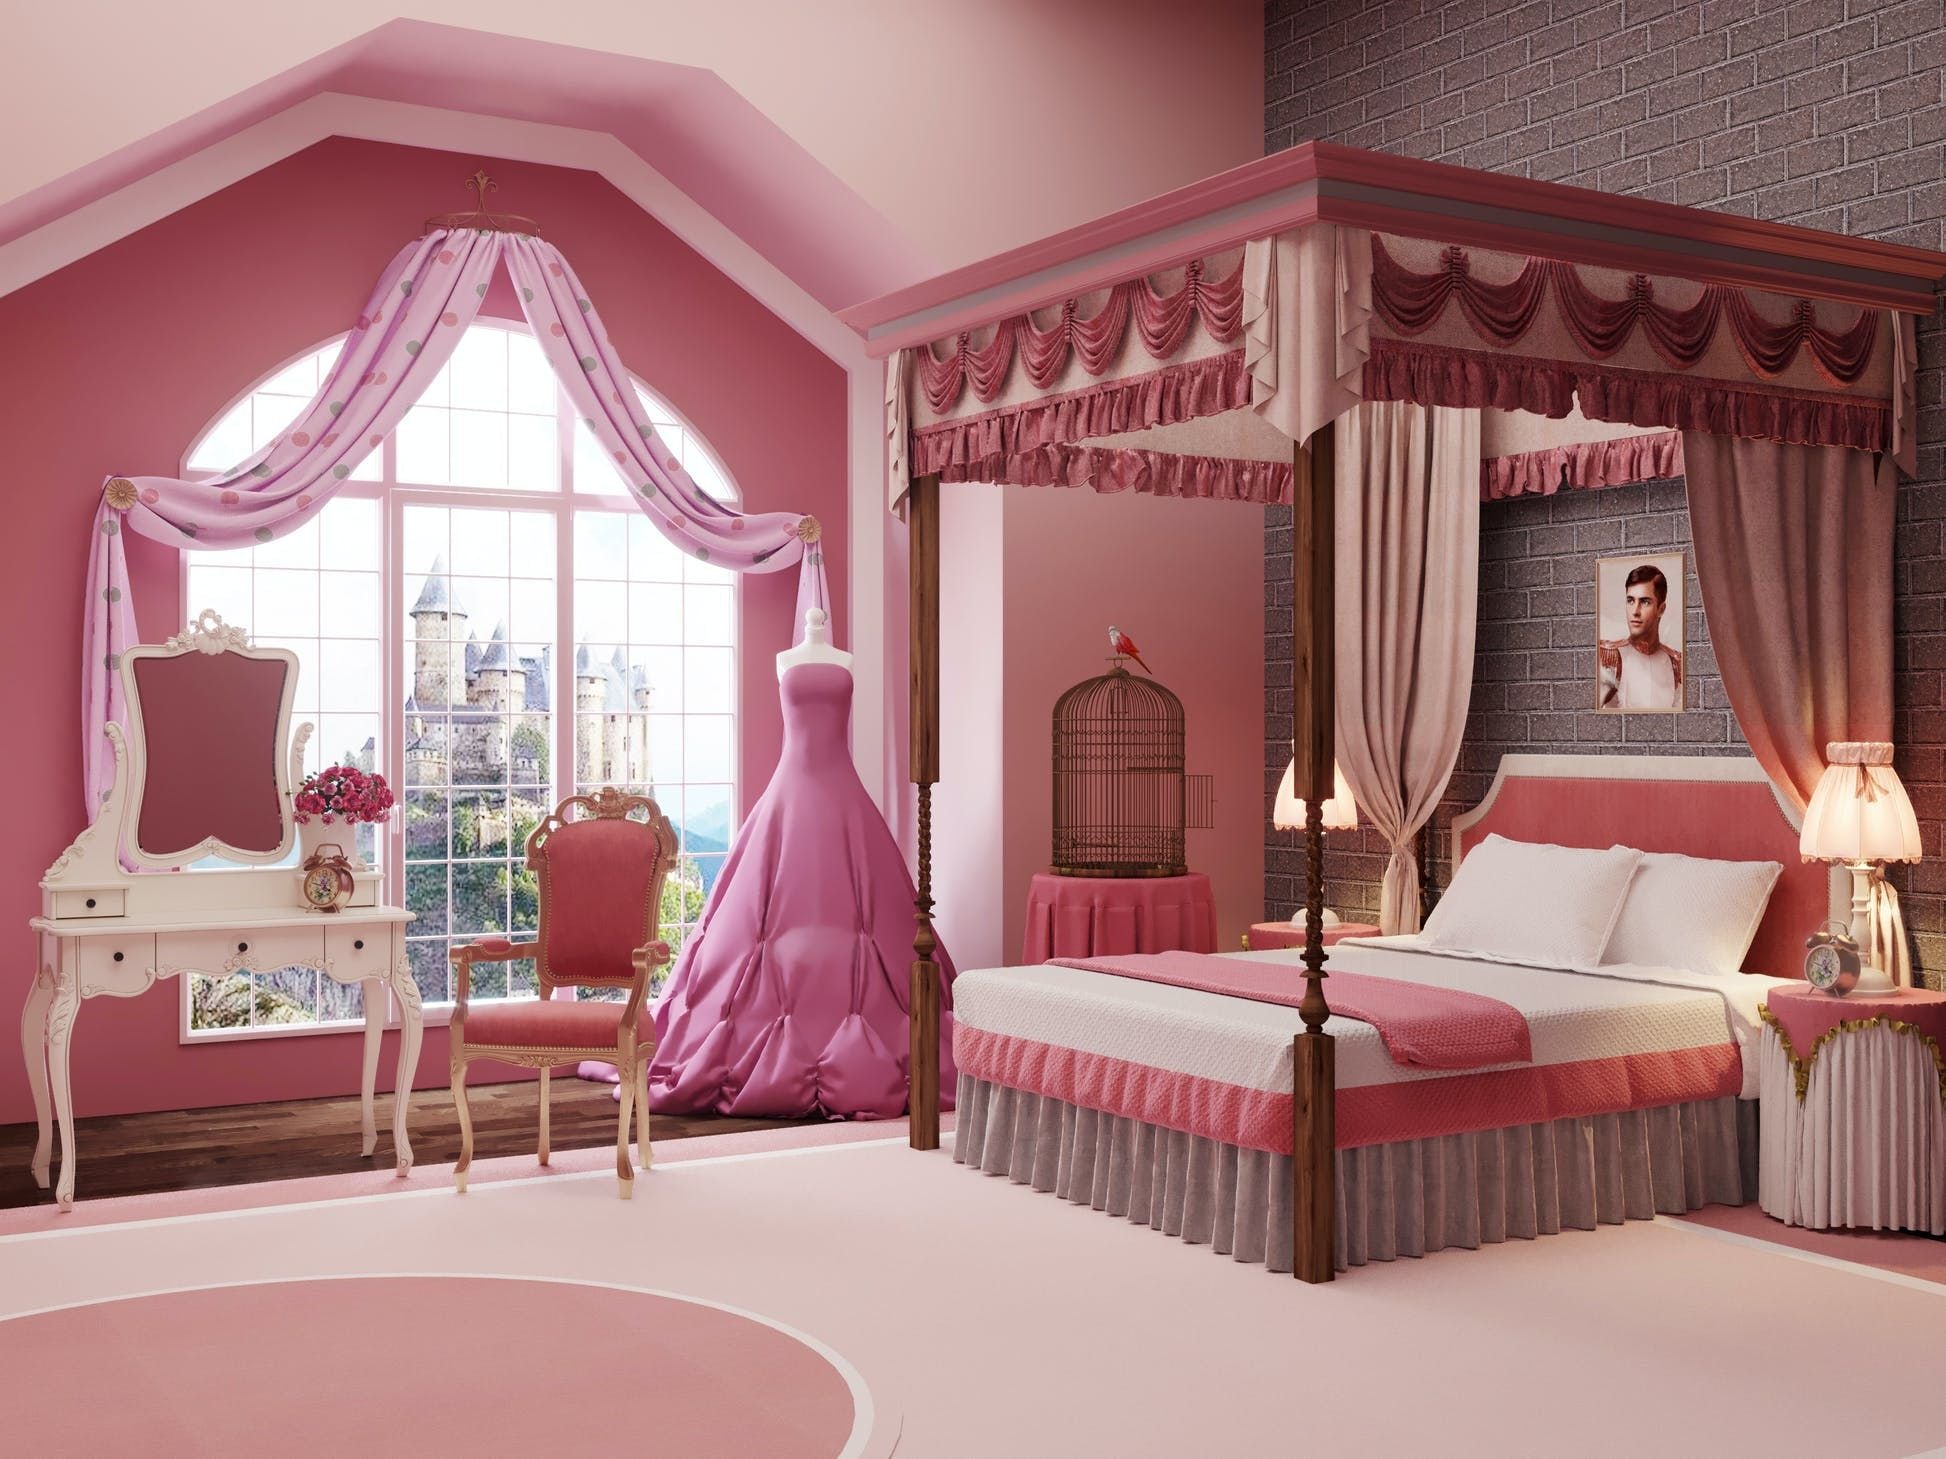 Princess Aurora's (Sleeping Beauty) fantasy bedroom, as imagined by the minds over at money.co.uk.